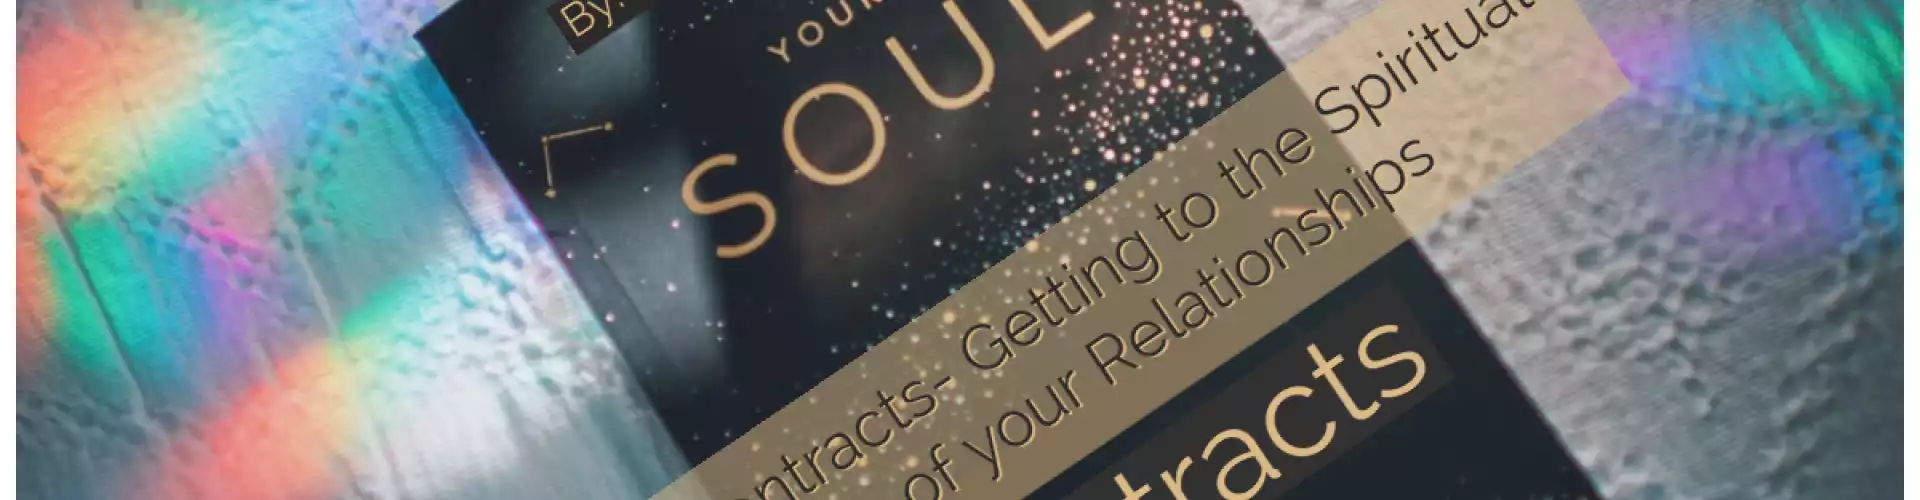 Soul Contracts - Getting into the Spiritual Root of Relationships